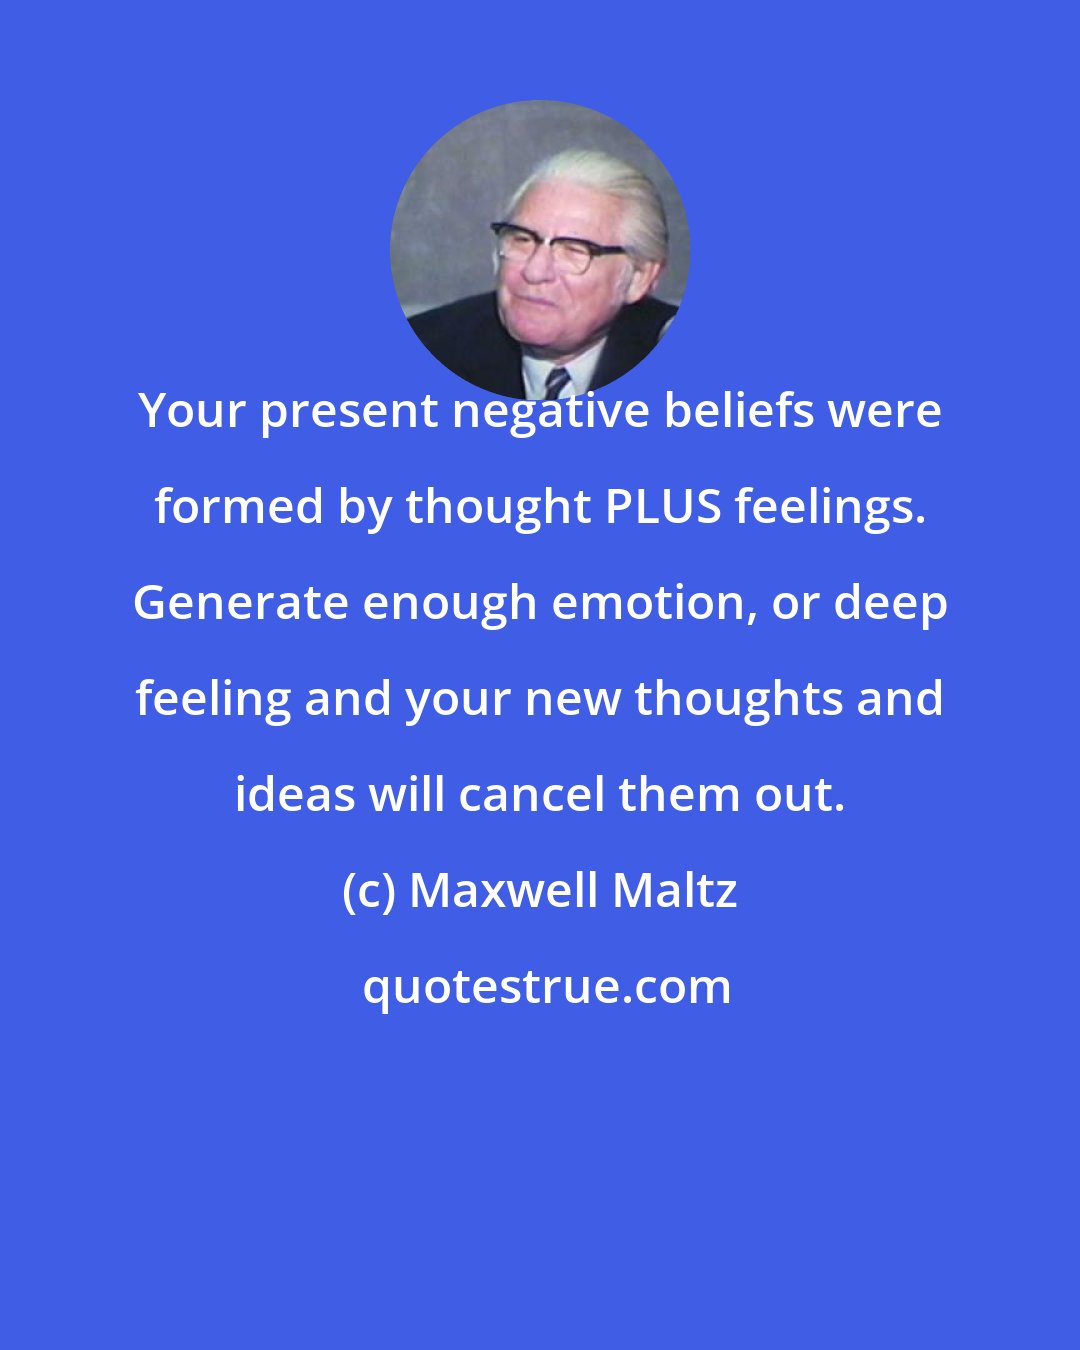 Maxwell Maltz: Your present negative beliefs were formed by thought PLUS feelings. Generate enough emotion, or deep feeling and your new thoughts and ideas will cancel them out.